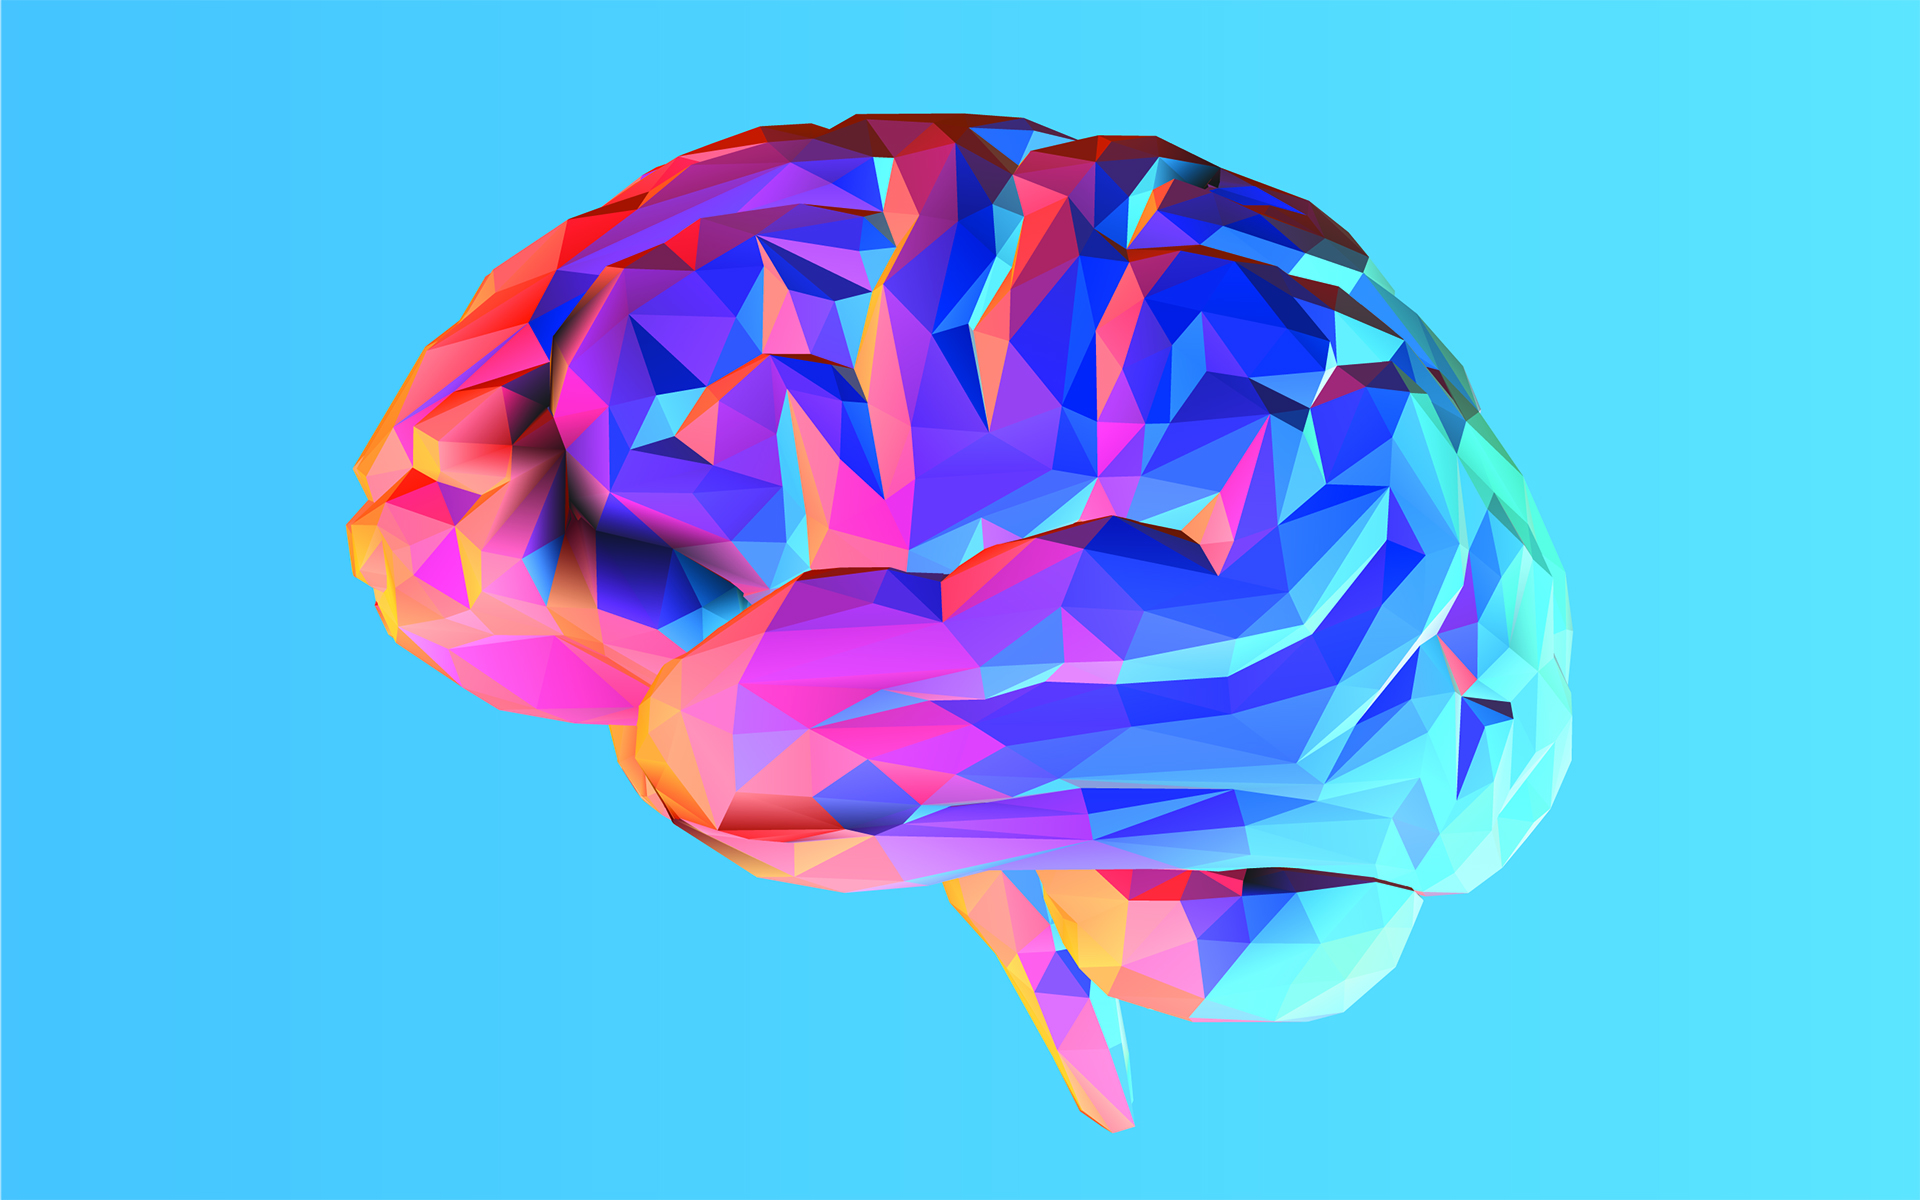 How Your Brain Creates Your Sense of Self - Colorful side view brain illustration isolated on blue background